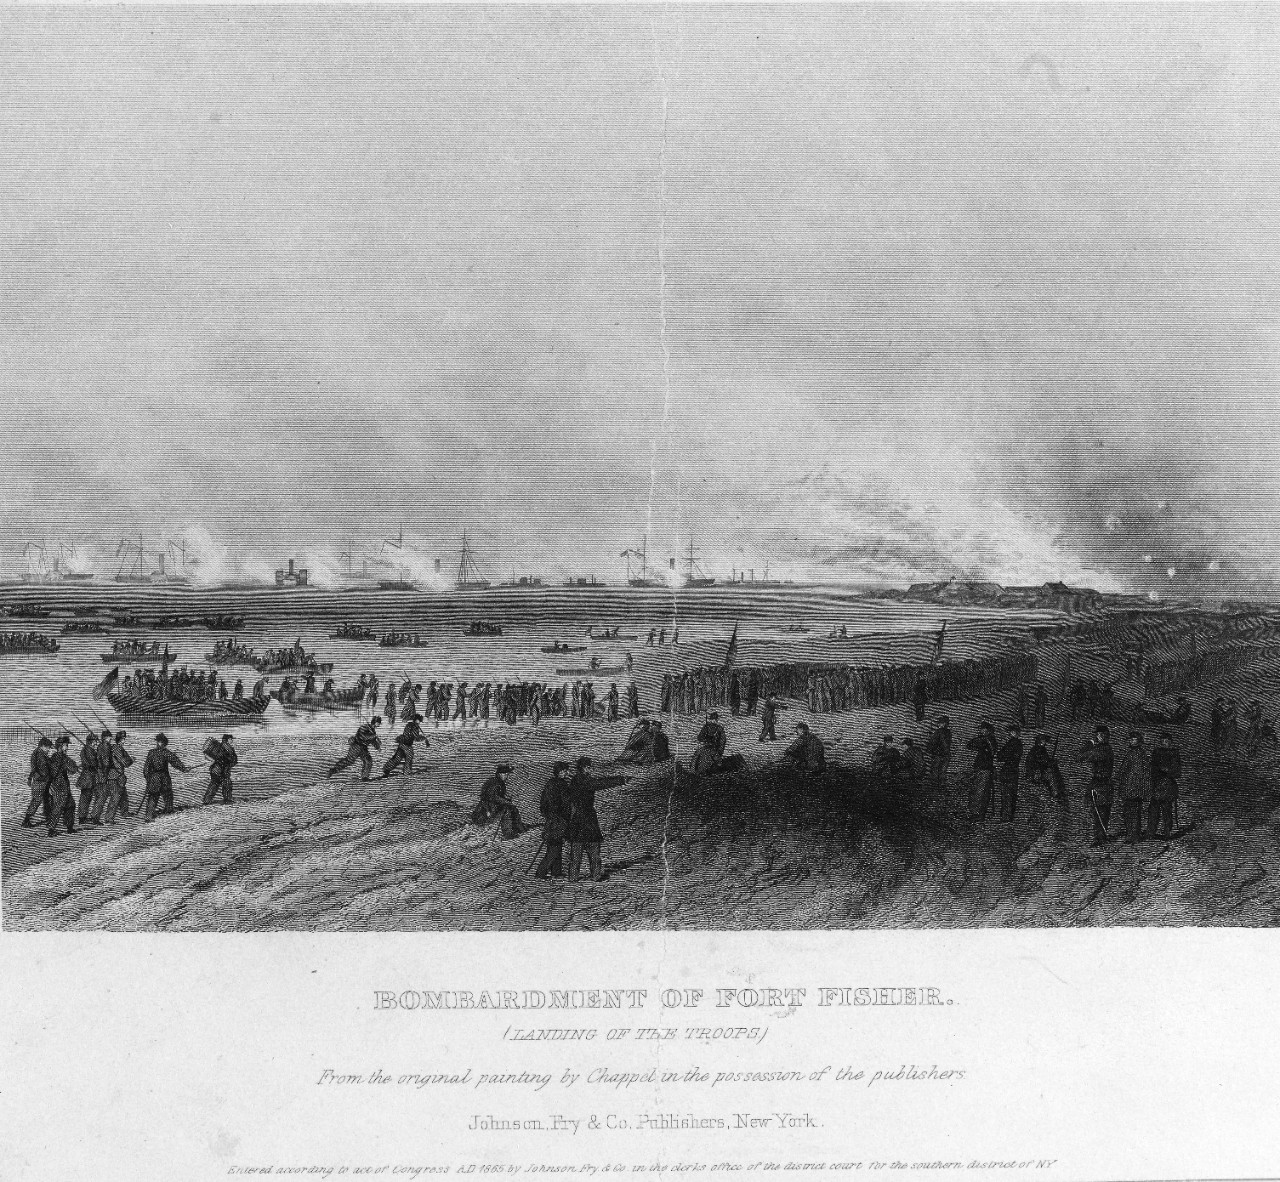 newspaper illustration of troops landing on a beach